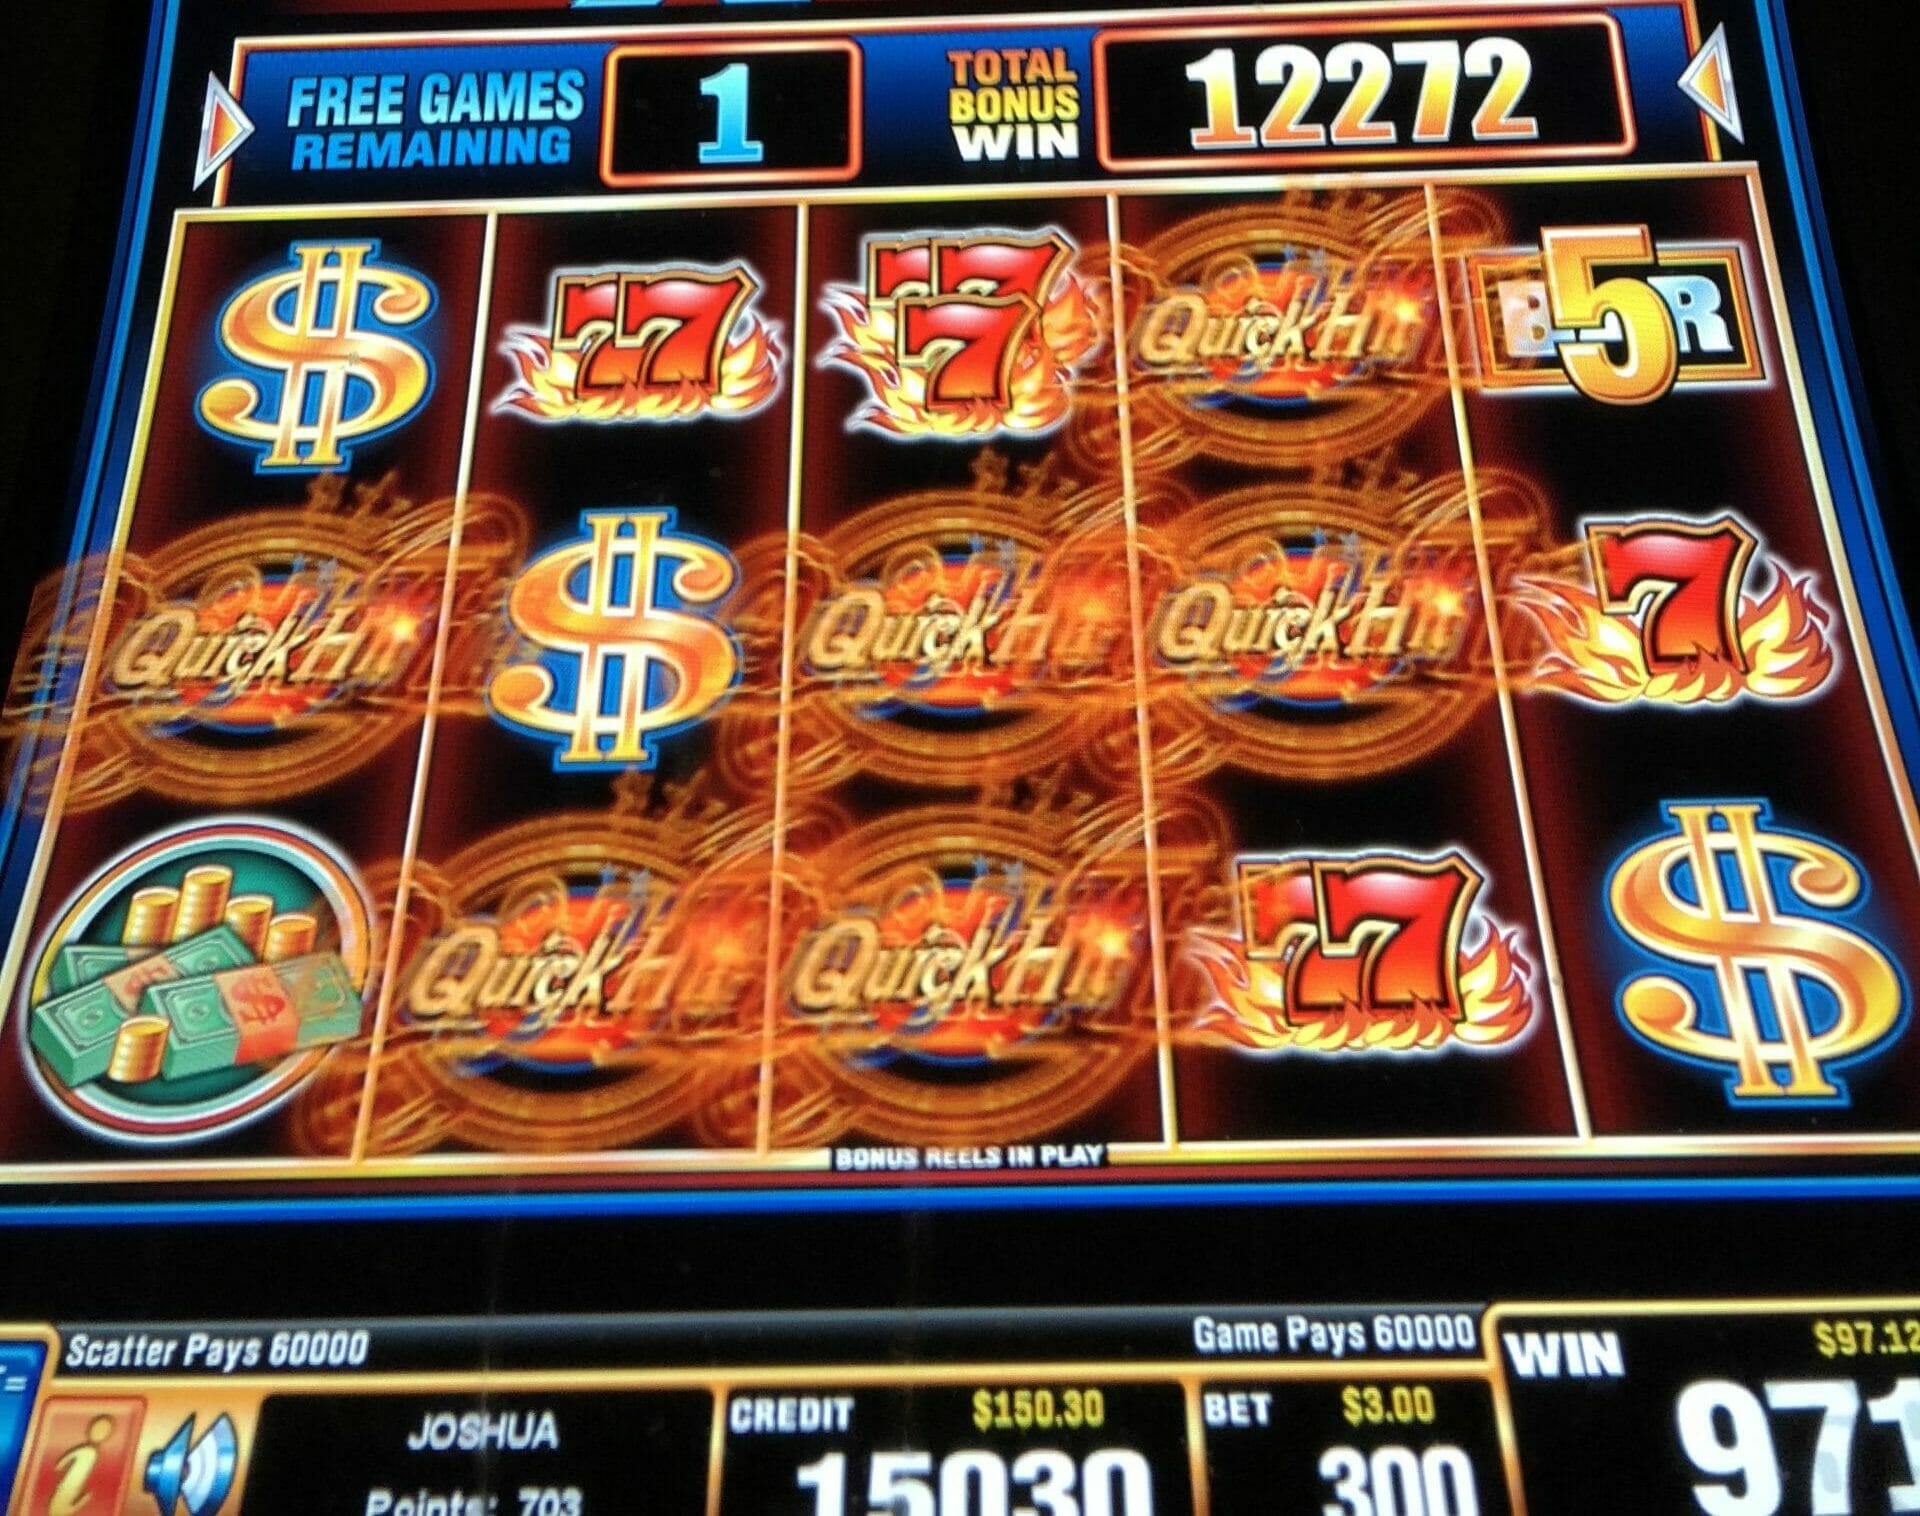 Vegas Slots App | Online Casinos With Live Games - O'shell Cpa Slot